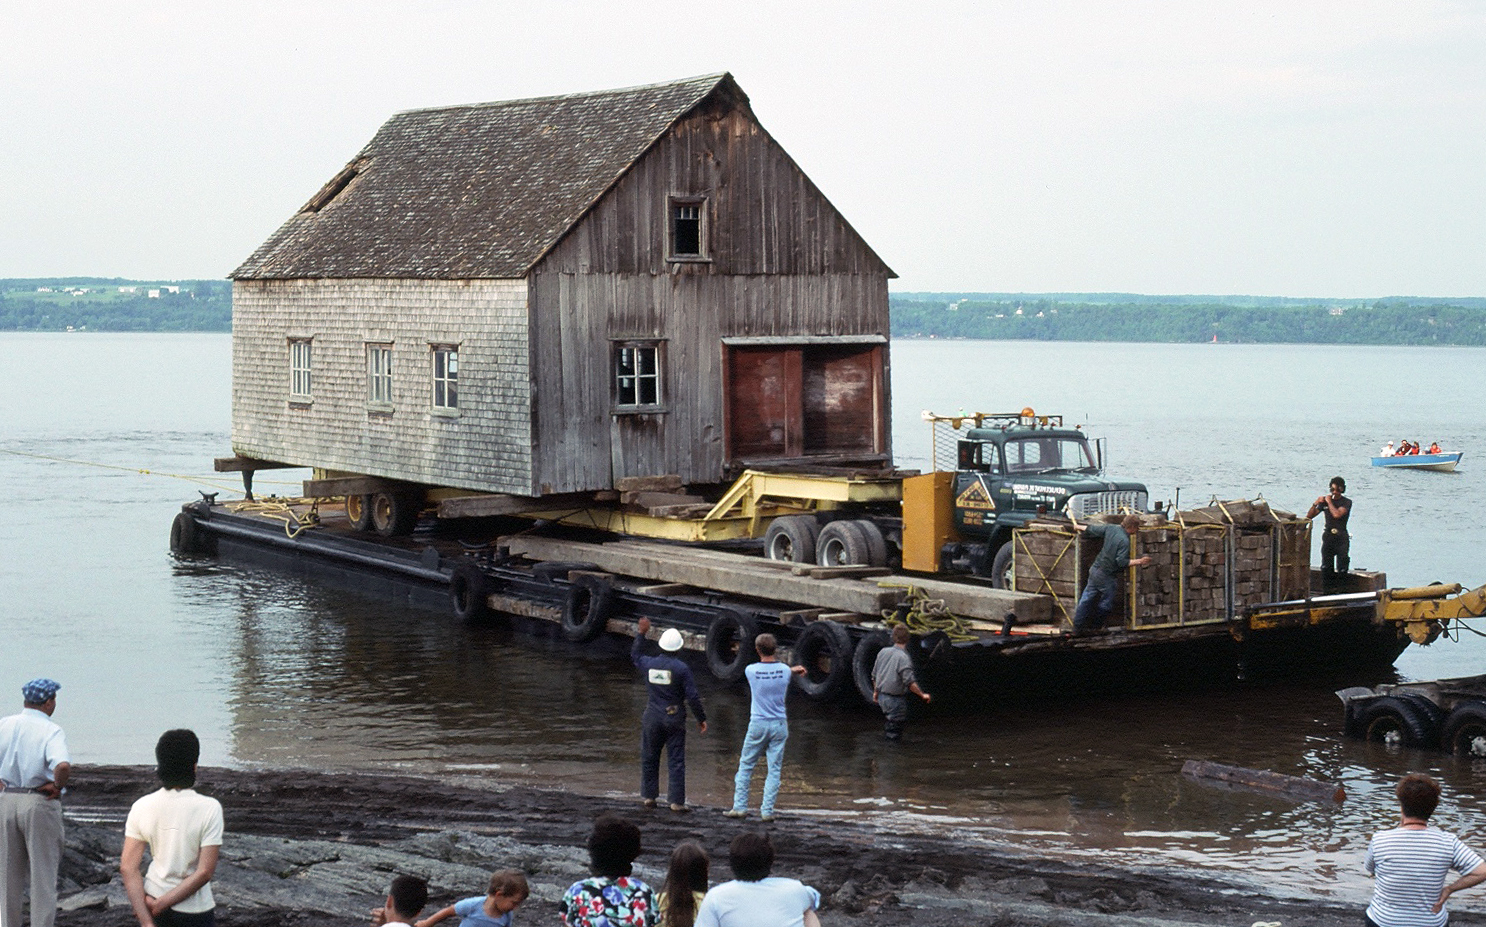 Color photograph showing the relocation by boat of a wooden and cedar shingles rowboat shop. The building sits on a trailer pulled by a truck, all mounted on a barge. Five workers are on the barge or near the shore. Curious children and adults watch the scene.